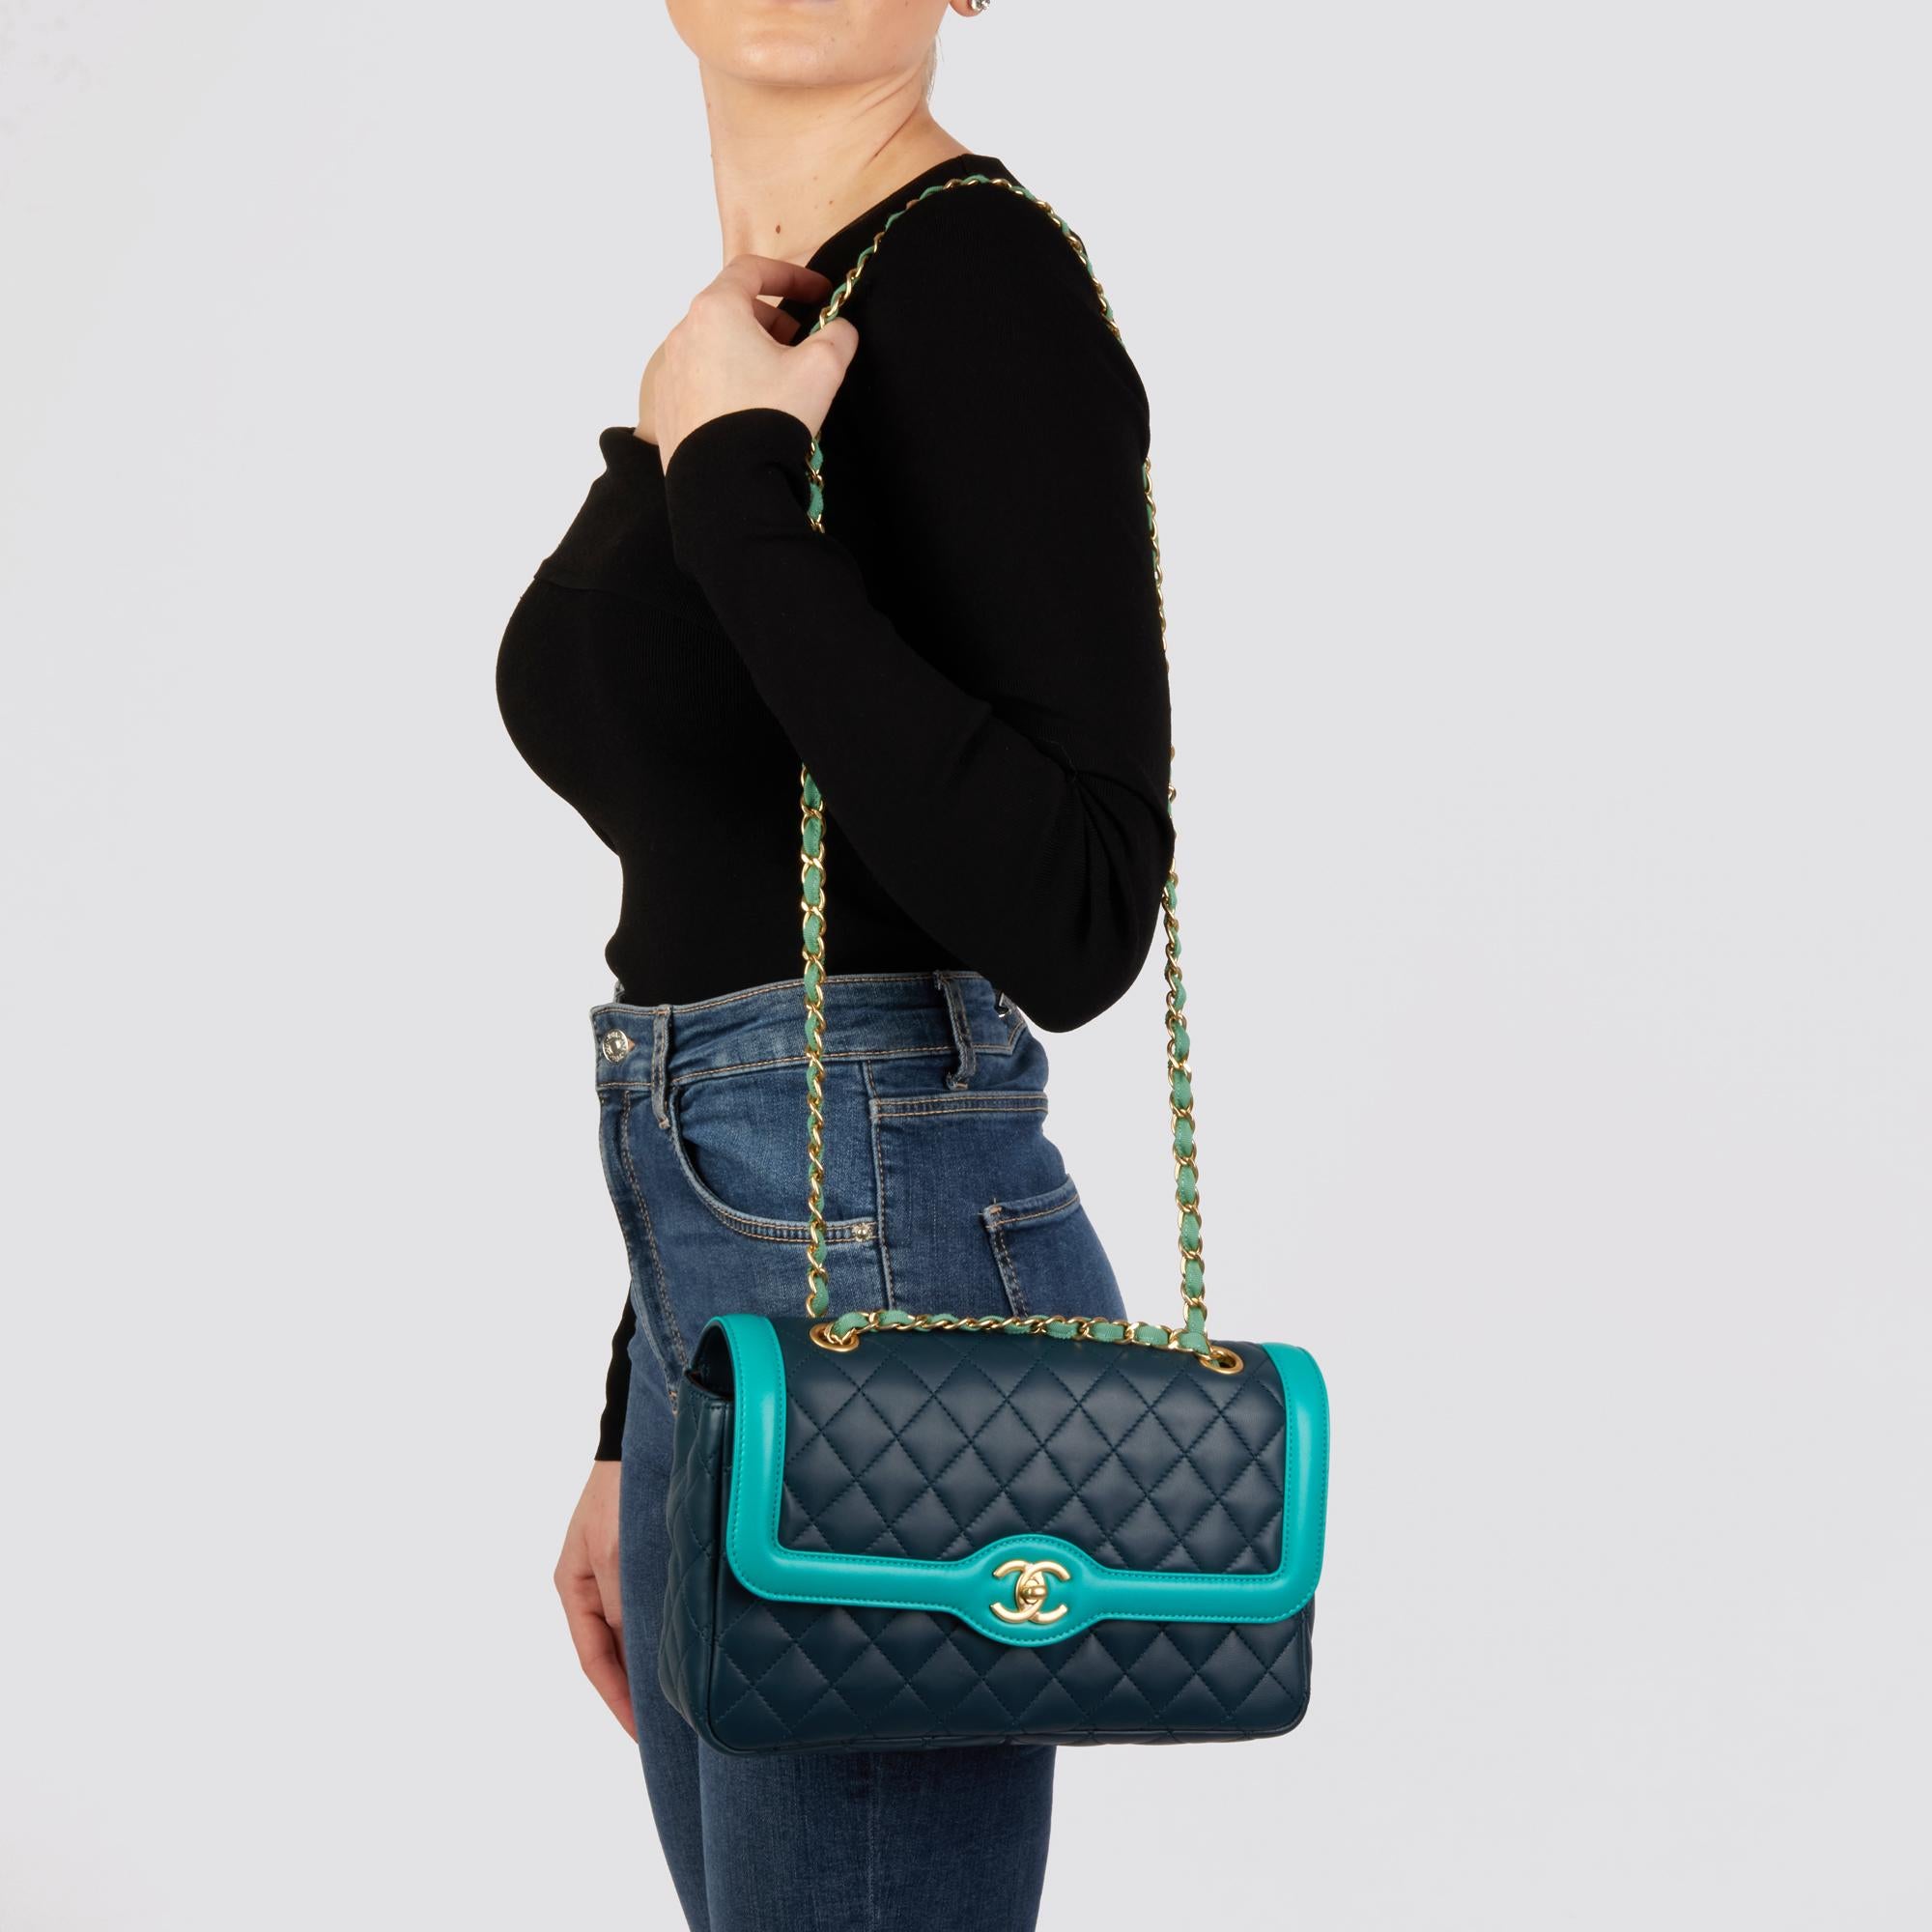 CHANEL Navy & Turquoise Quilted Lambskin Medium Classic Single Flap Bag 8